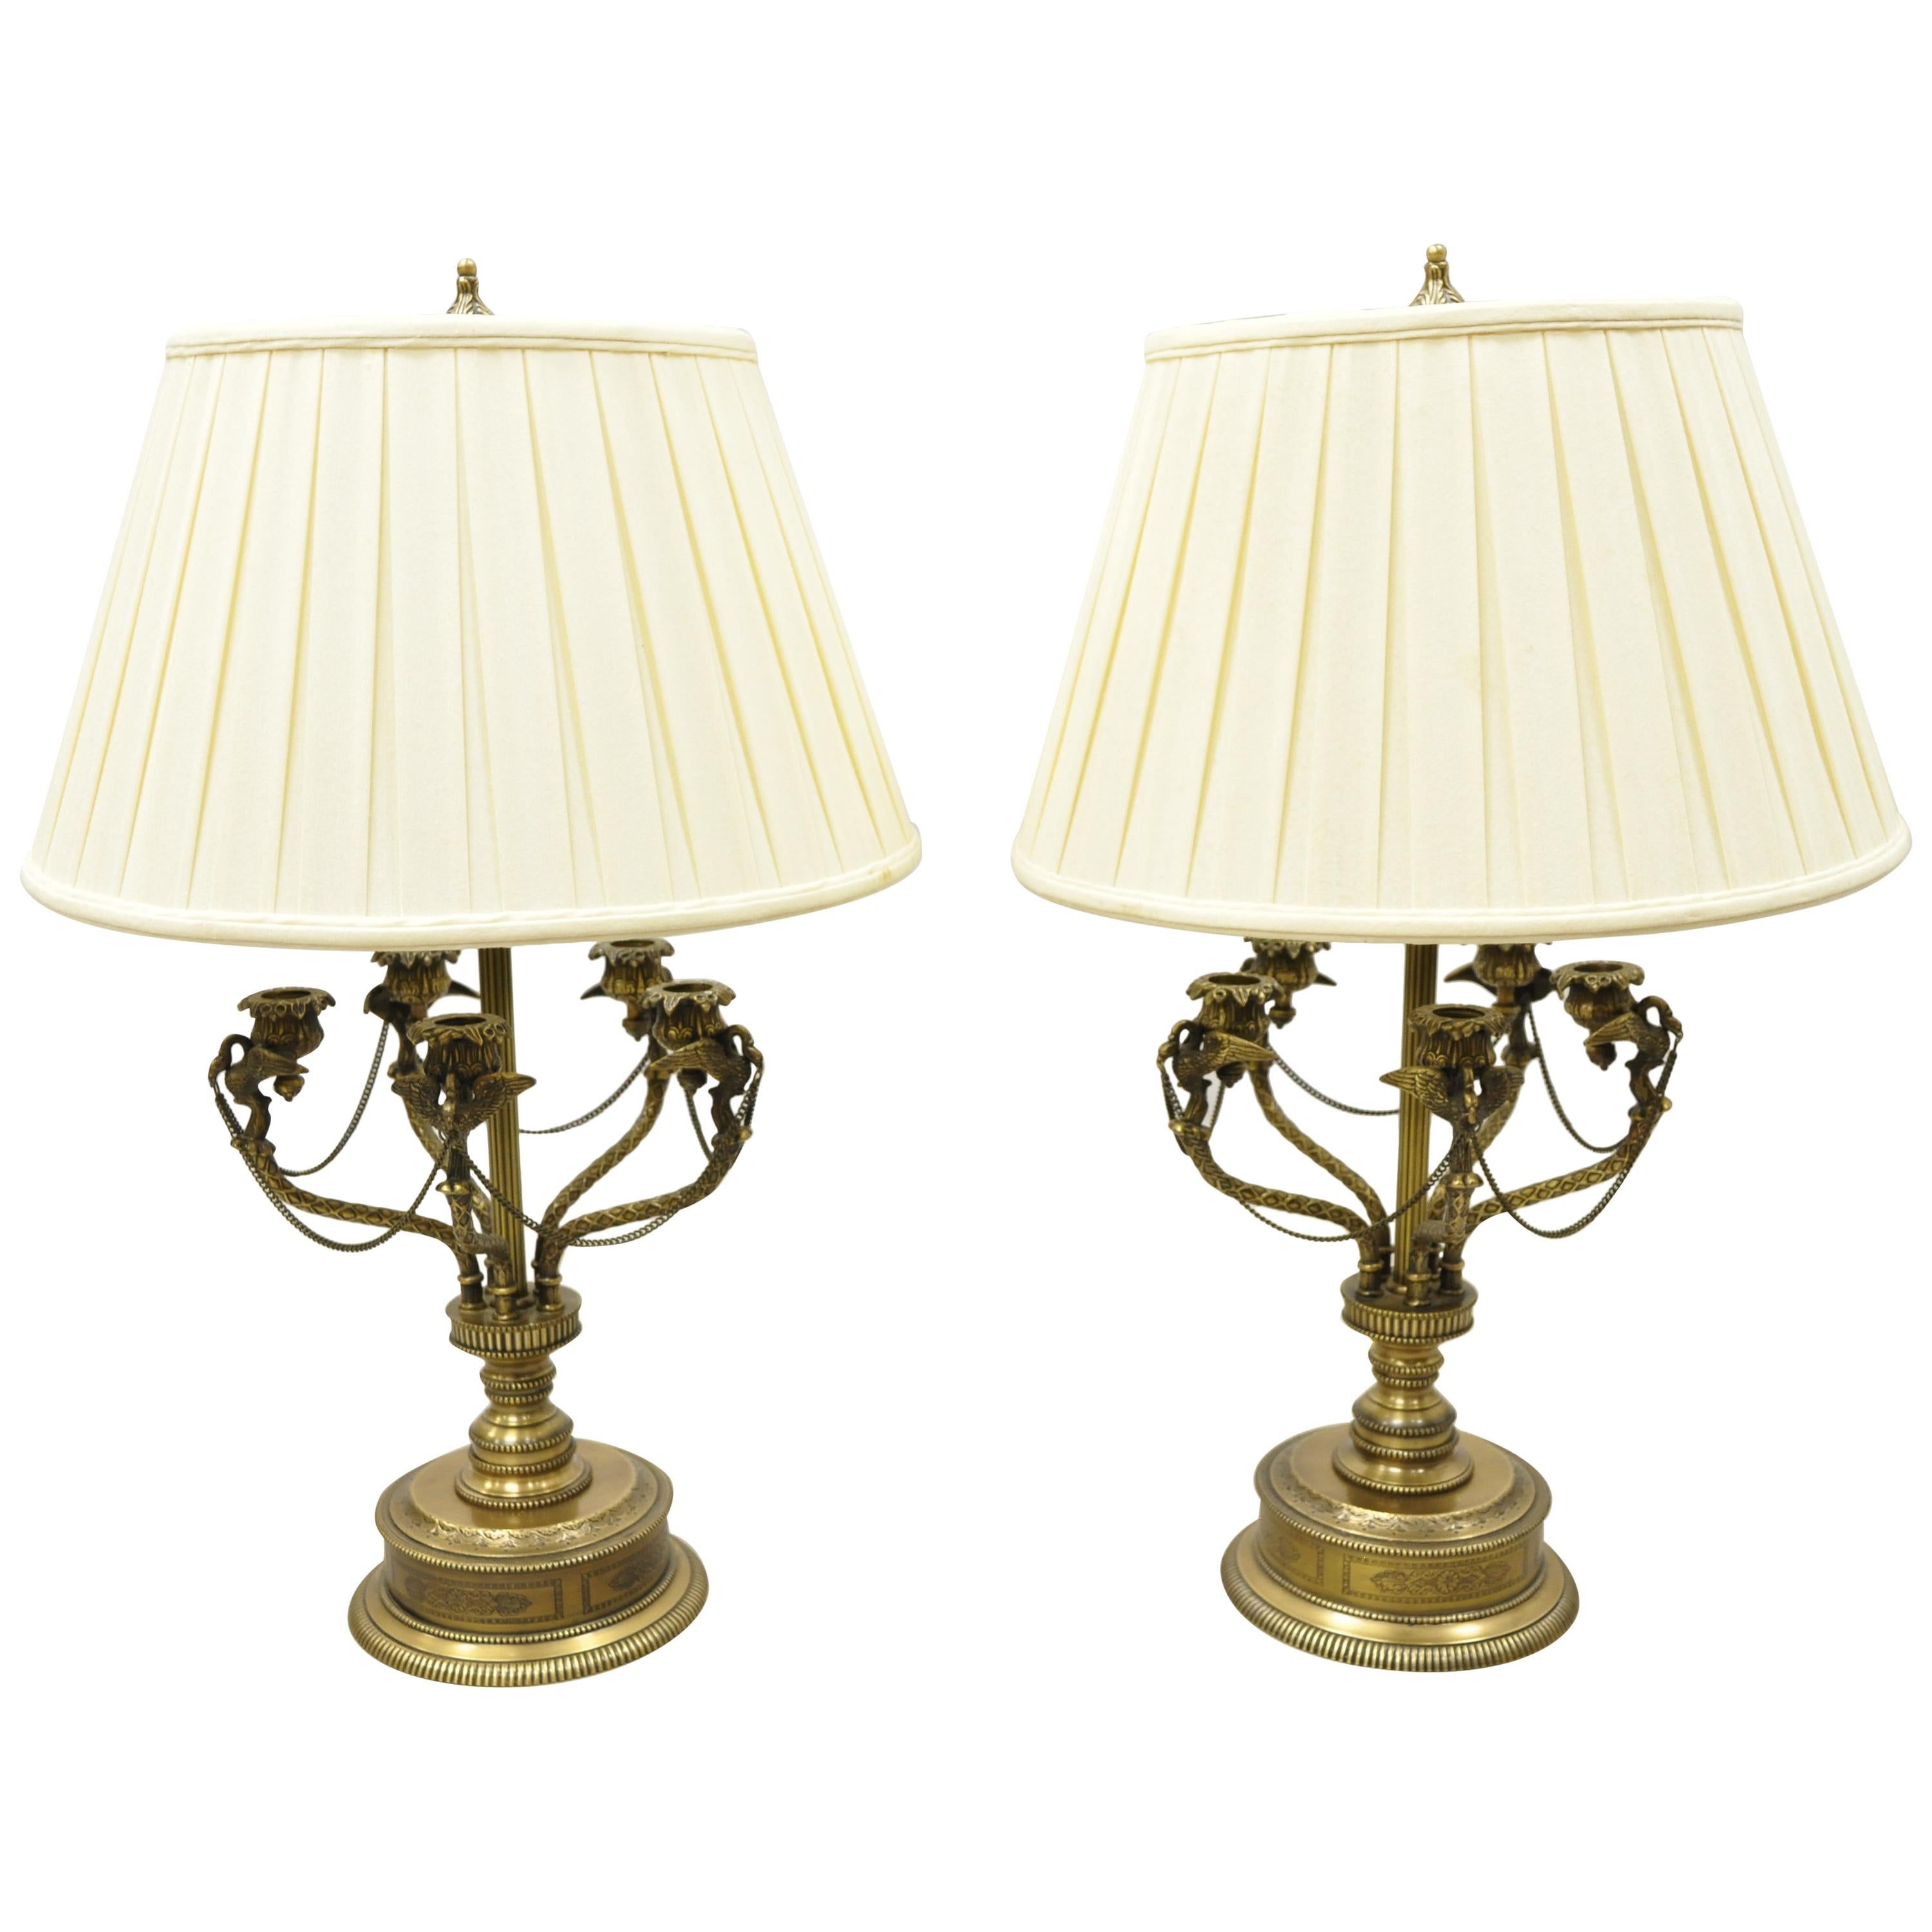 French Empire Style Brass Figural Bird Swan Candelabra Table Lamps, a Pair For Sale